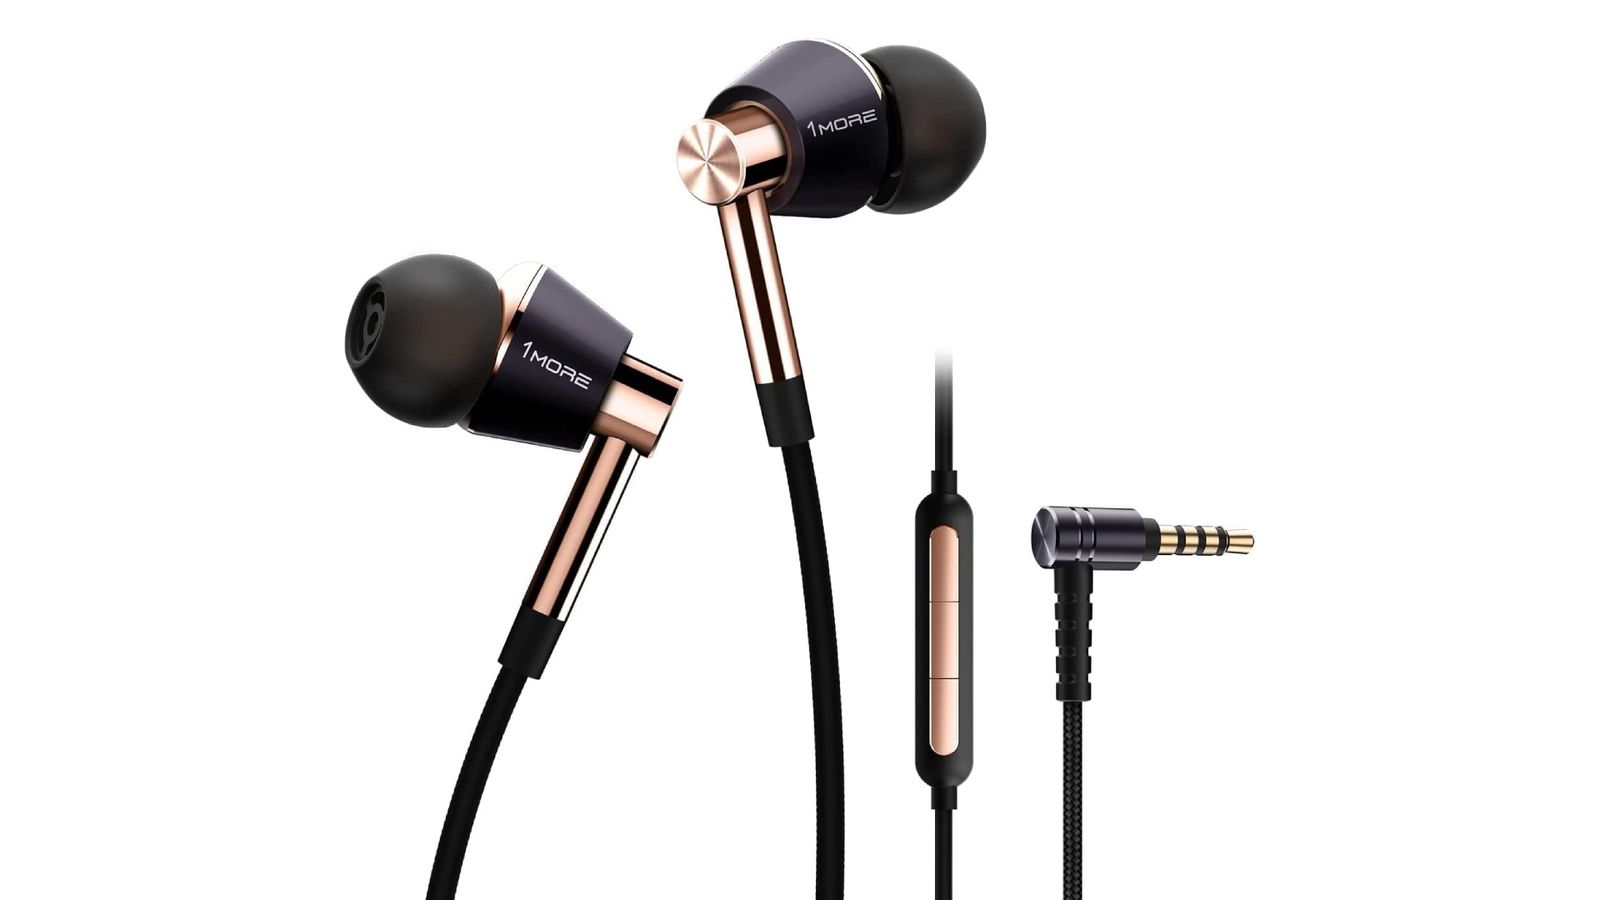 Best gaming earbuds - 1More Triple Driver In-Ear Headphones product image of a pair of black and gold wired earbuds